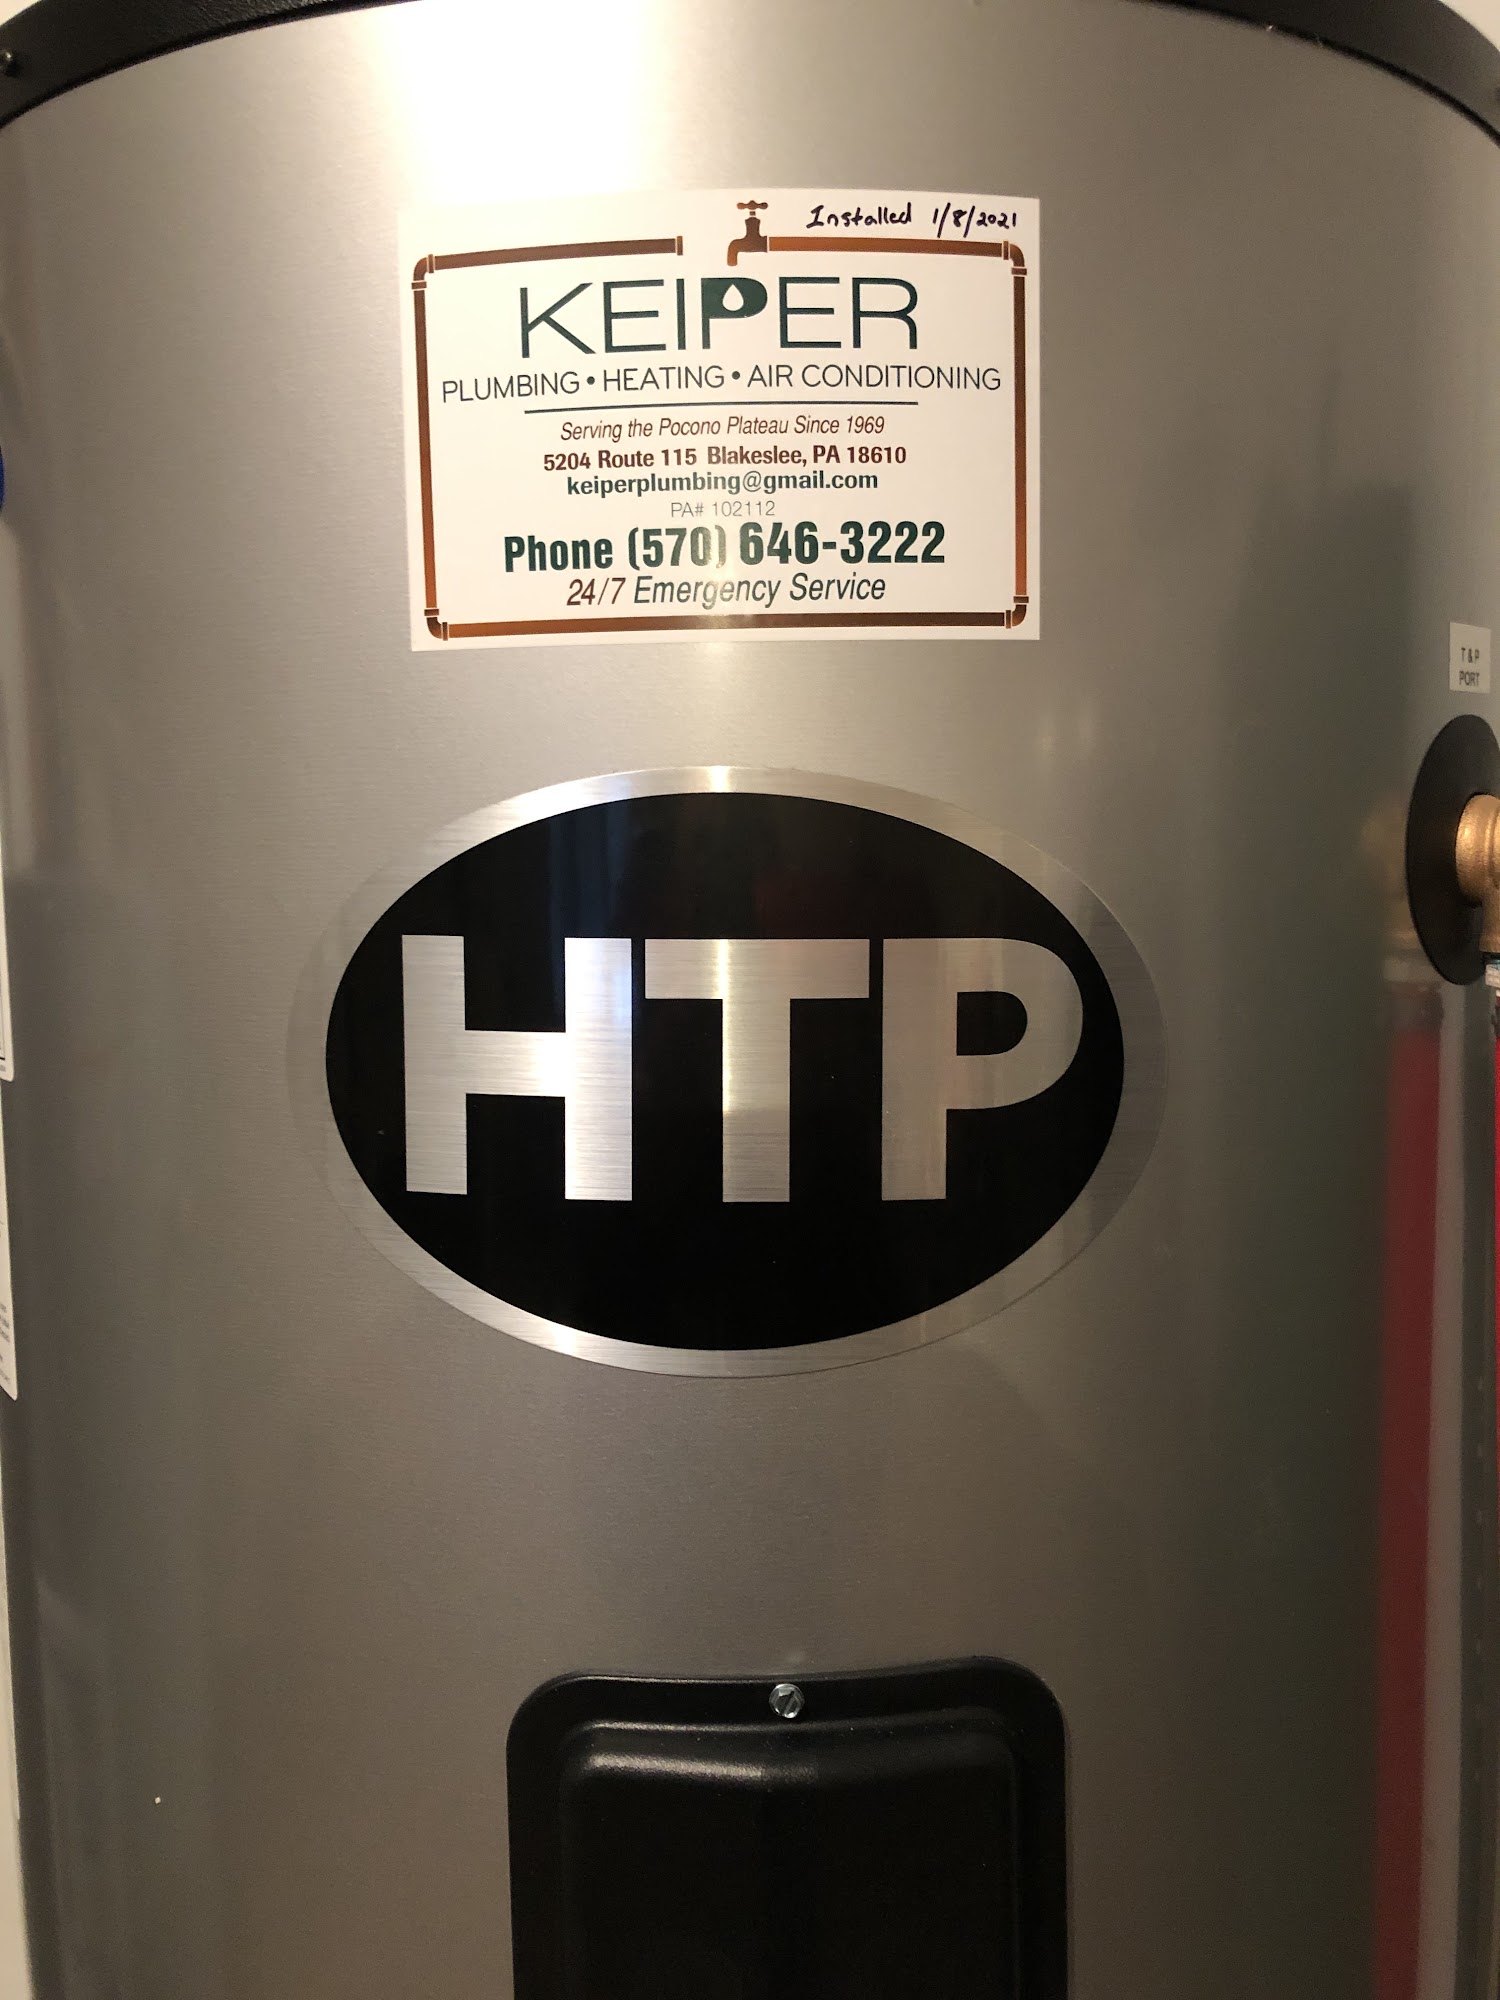 Keiper Plumbing, Heating & Air Conditioning